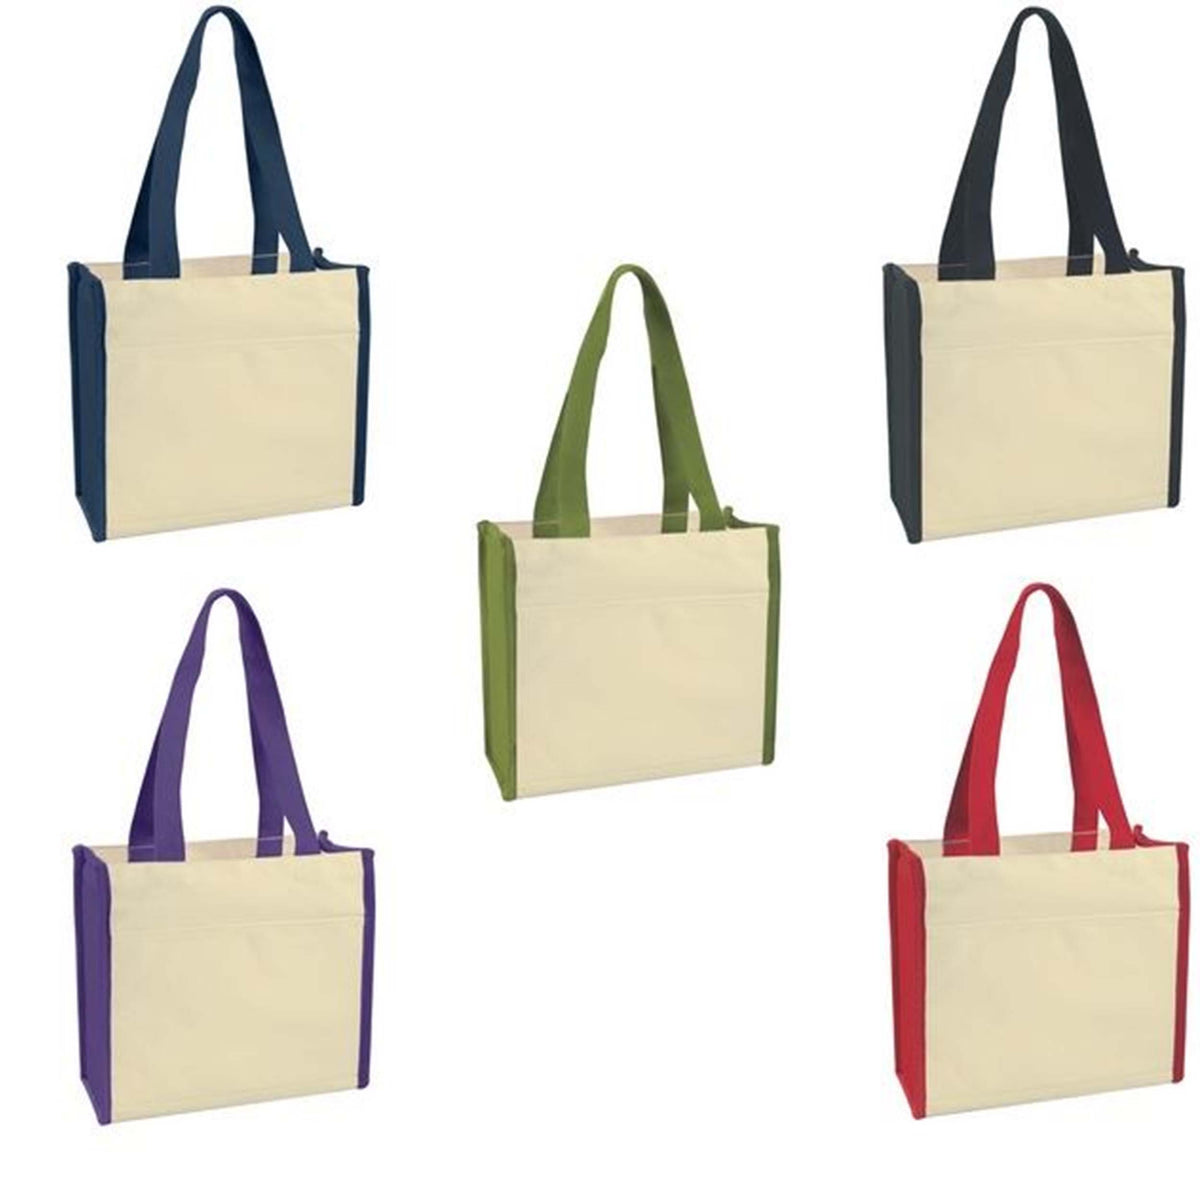 Heavy Cotton Canvas Tote Bag In Bulk- Assorted